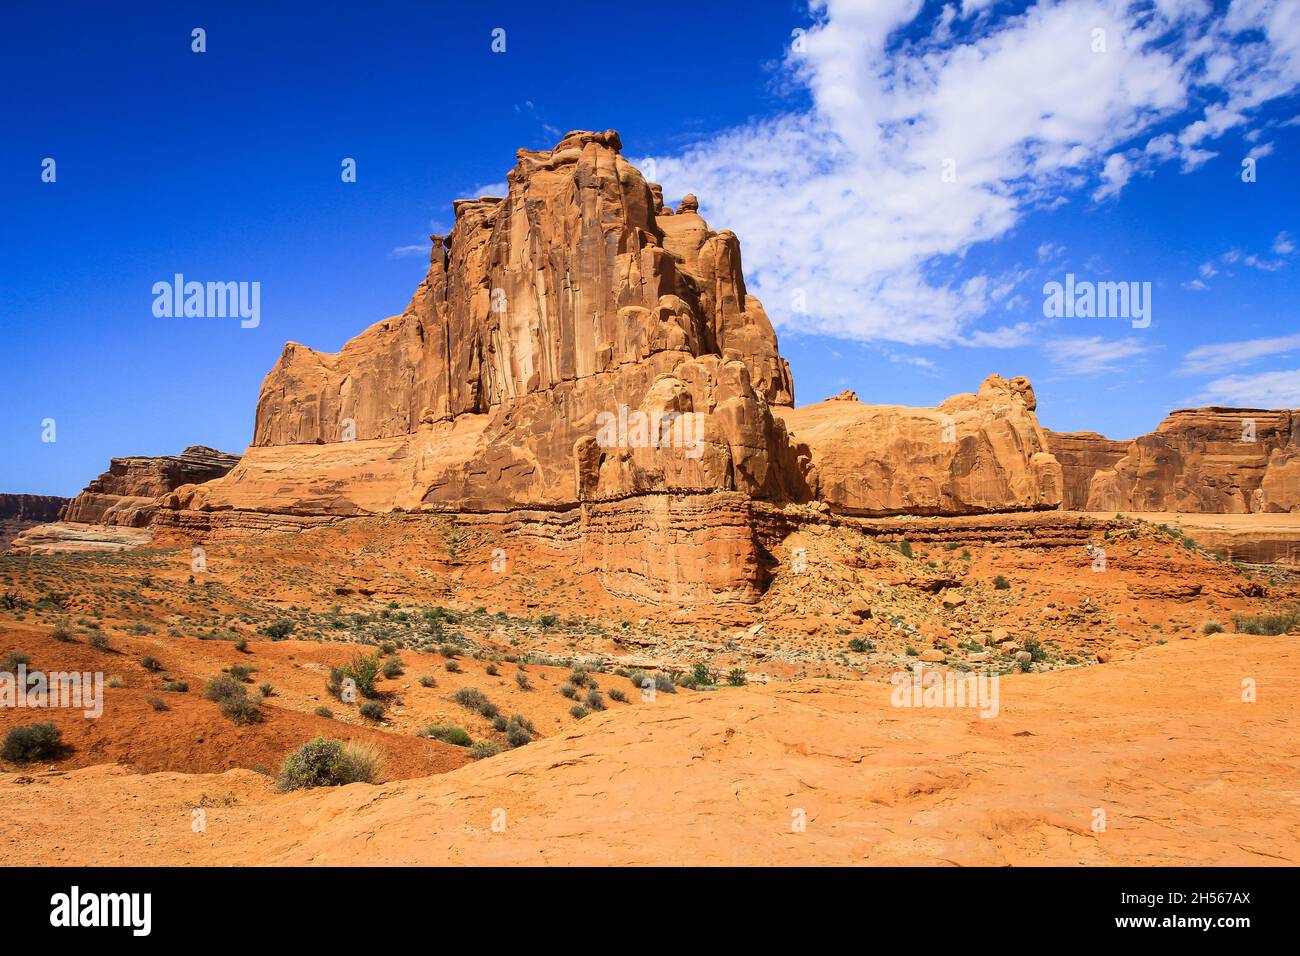 Arches National Park popular feature Courthouse Towers under blue sky with clouds | Landscape with amazing sandstone formation, tall stone columns Stock Photo